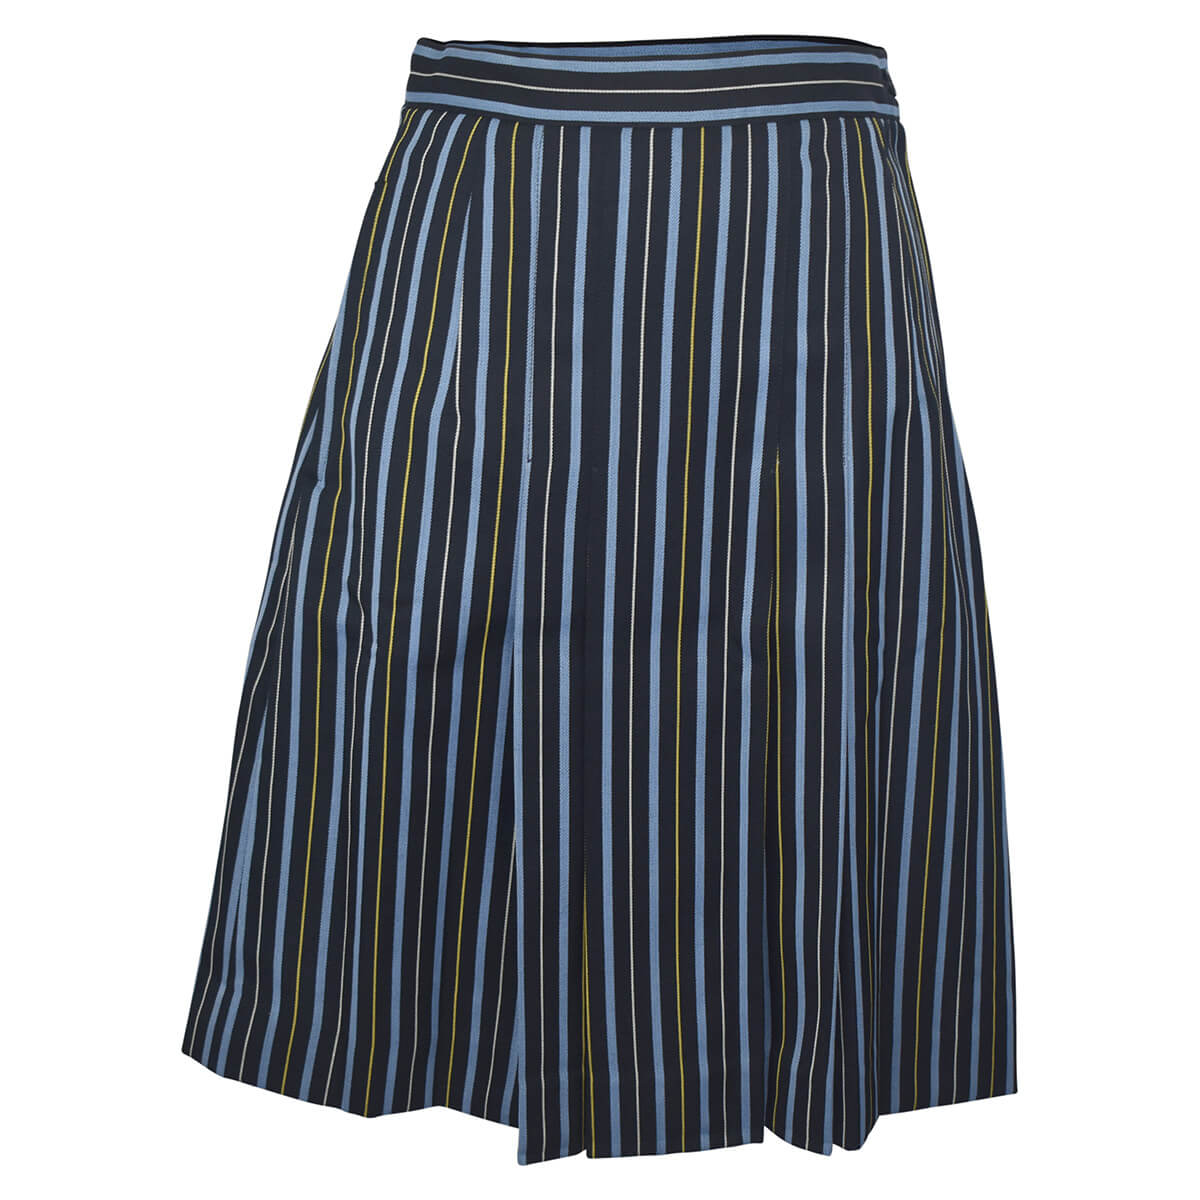 Lowther Hall Skirt | Lowther Hall Anglican Grammar School | Noone